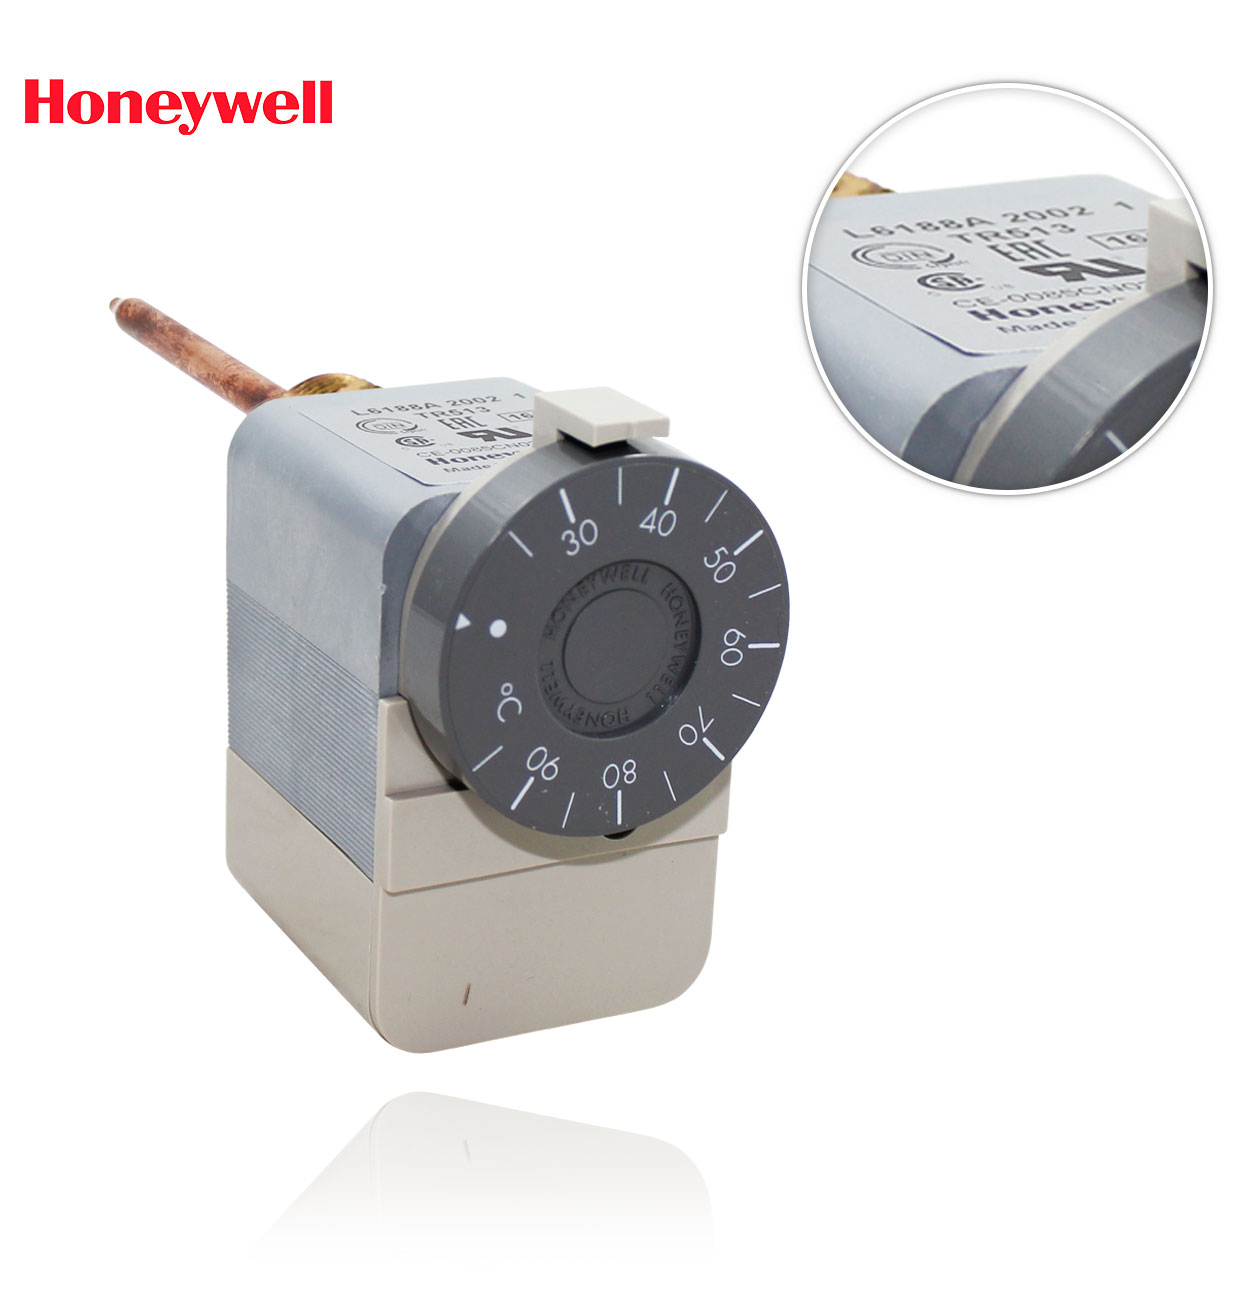 L 6188 A 2002 IMMERSION THERMOSTAT WITH SLEEVE